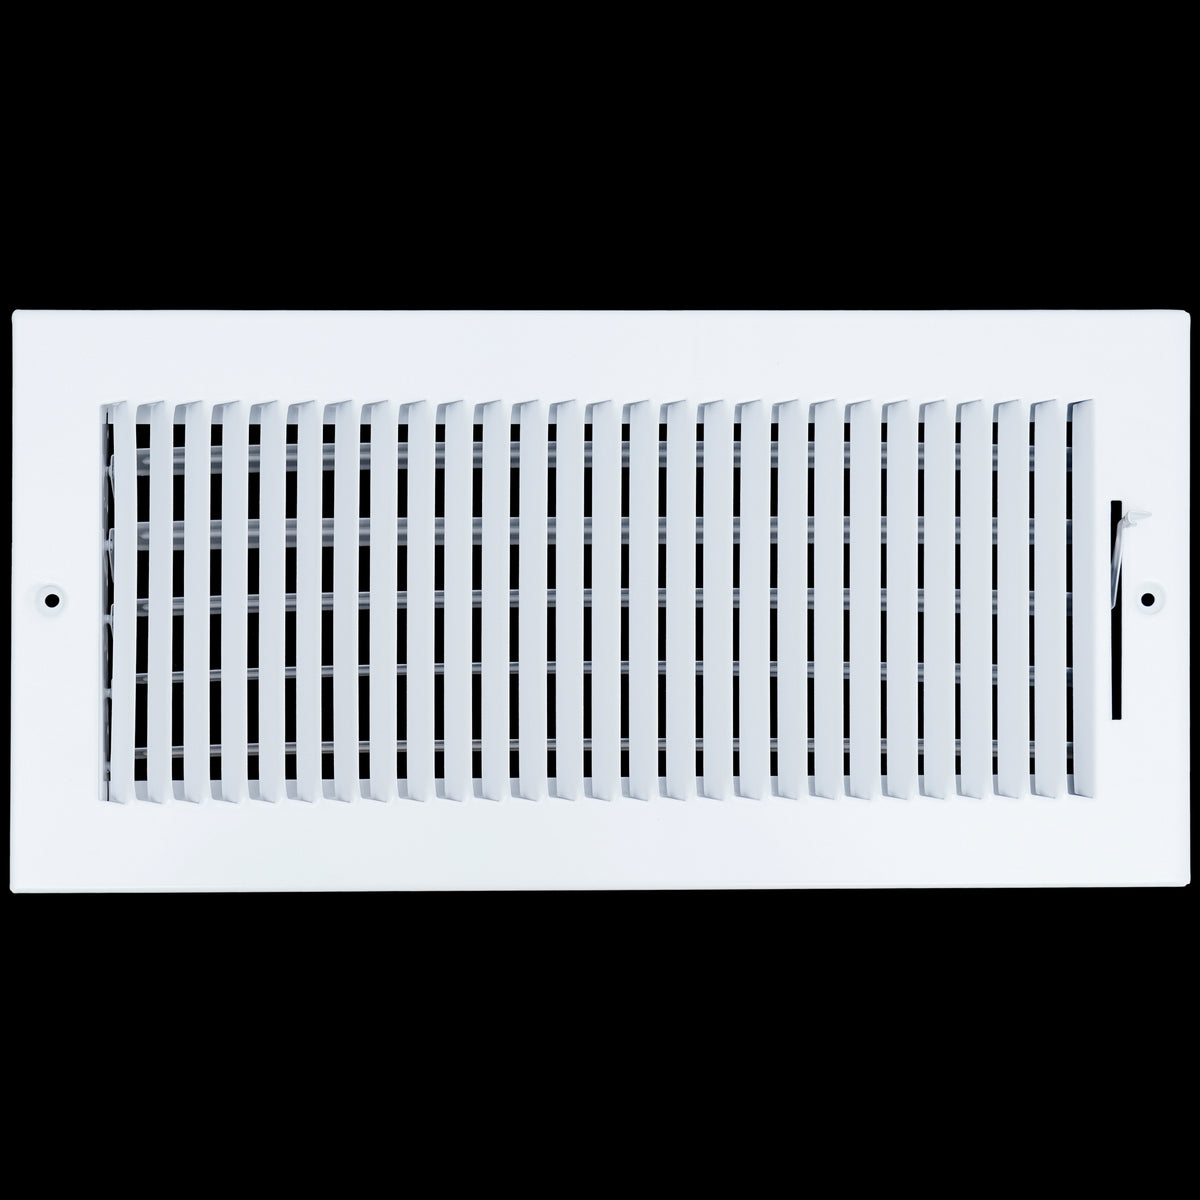 airgrilles 14 x 6 duct opening  -  1 way steel air supply diffuser for sidewall and ceiling hnd-asg-wh-1way-14x6 764613097740 - 1